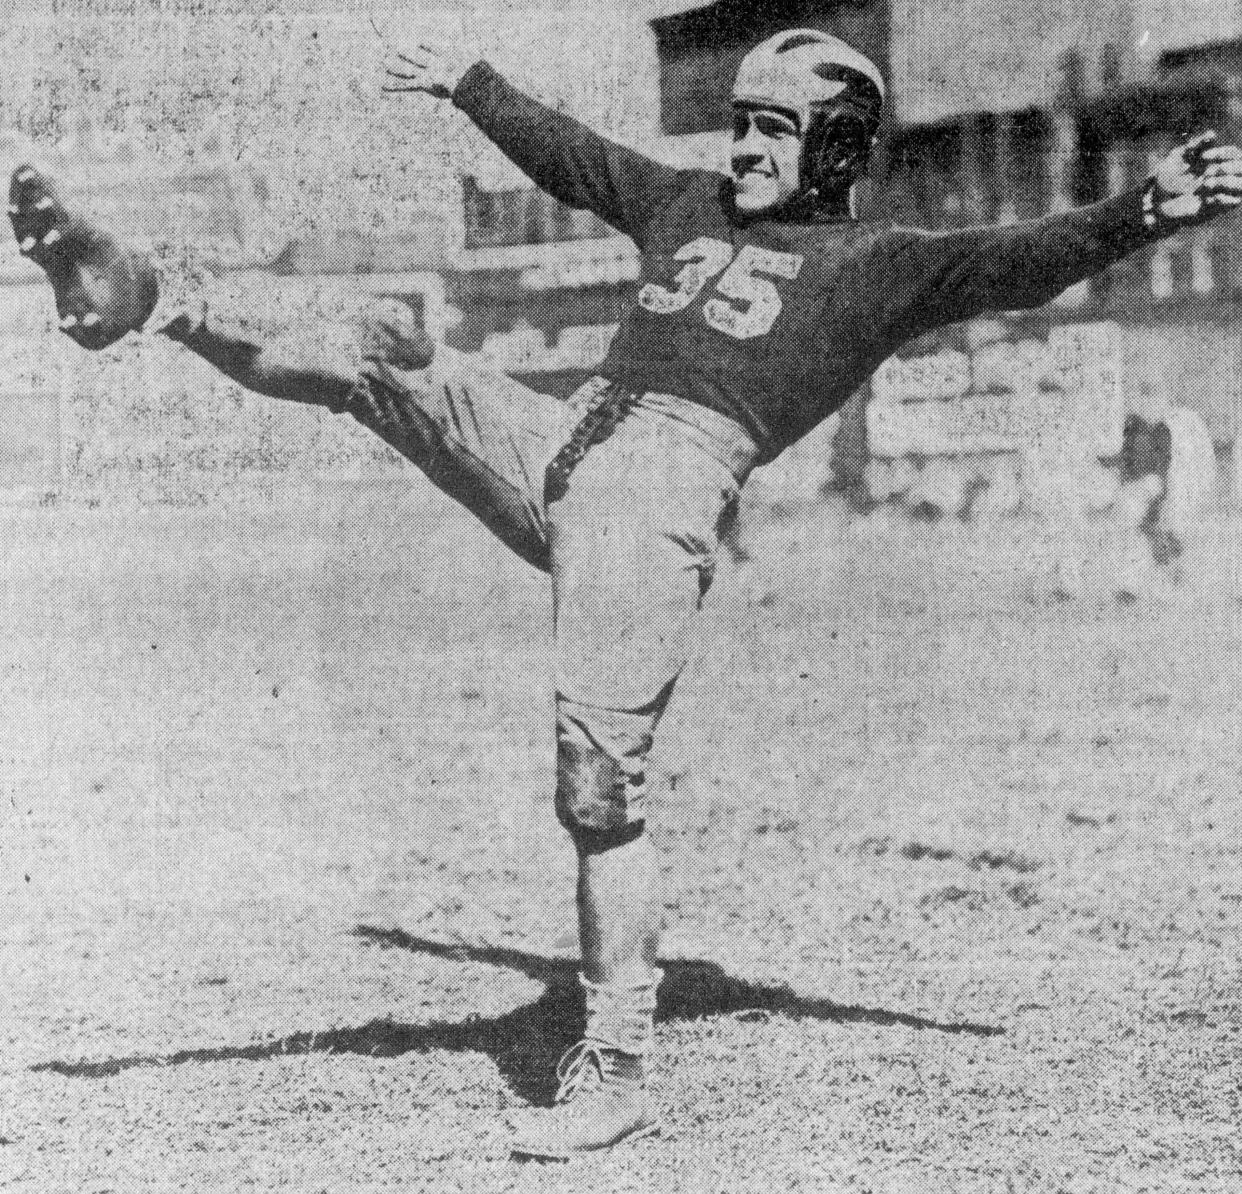 Gil LeFebvre of the Cincinnati Reds football team set an NFL record that stood for 61 years when he returned a punt 98 yards for a touchdown in a 1933 game against the Brooklyn Dodgers at Redland Field.